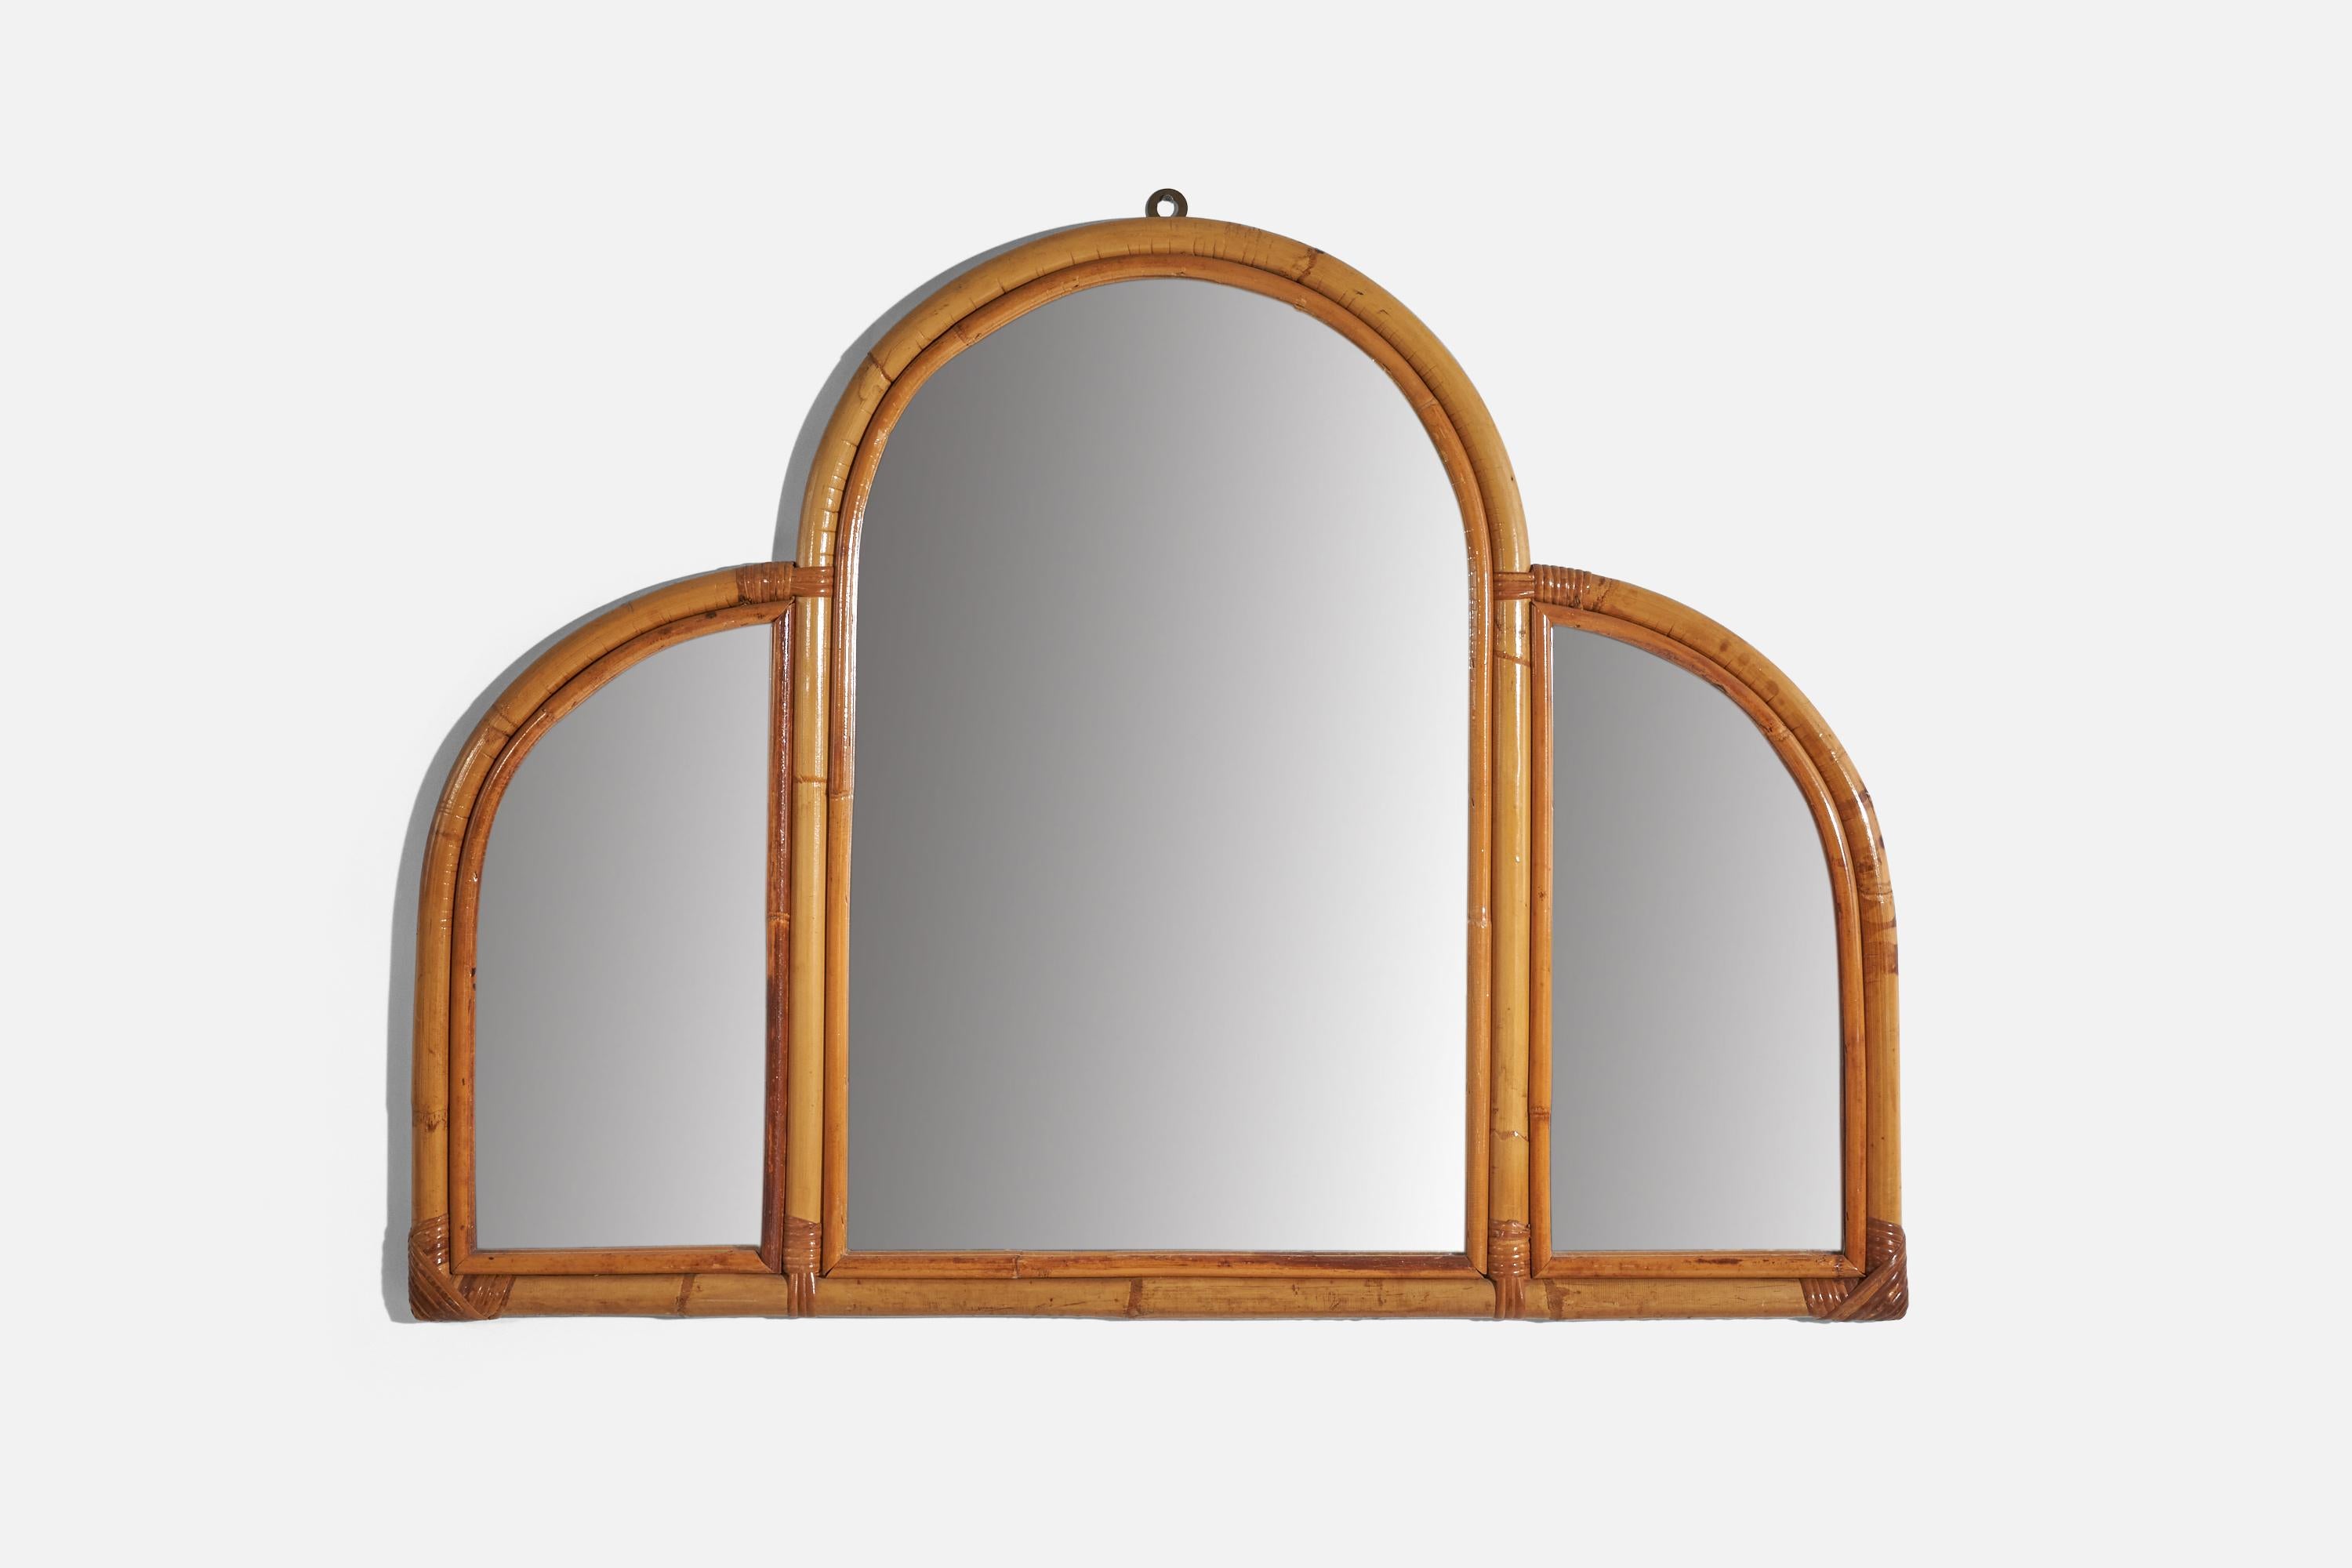 A bamboo and rattan wall mirror produced in Italy, c. 1950s-1960s.
 